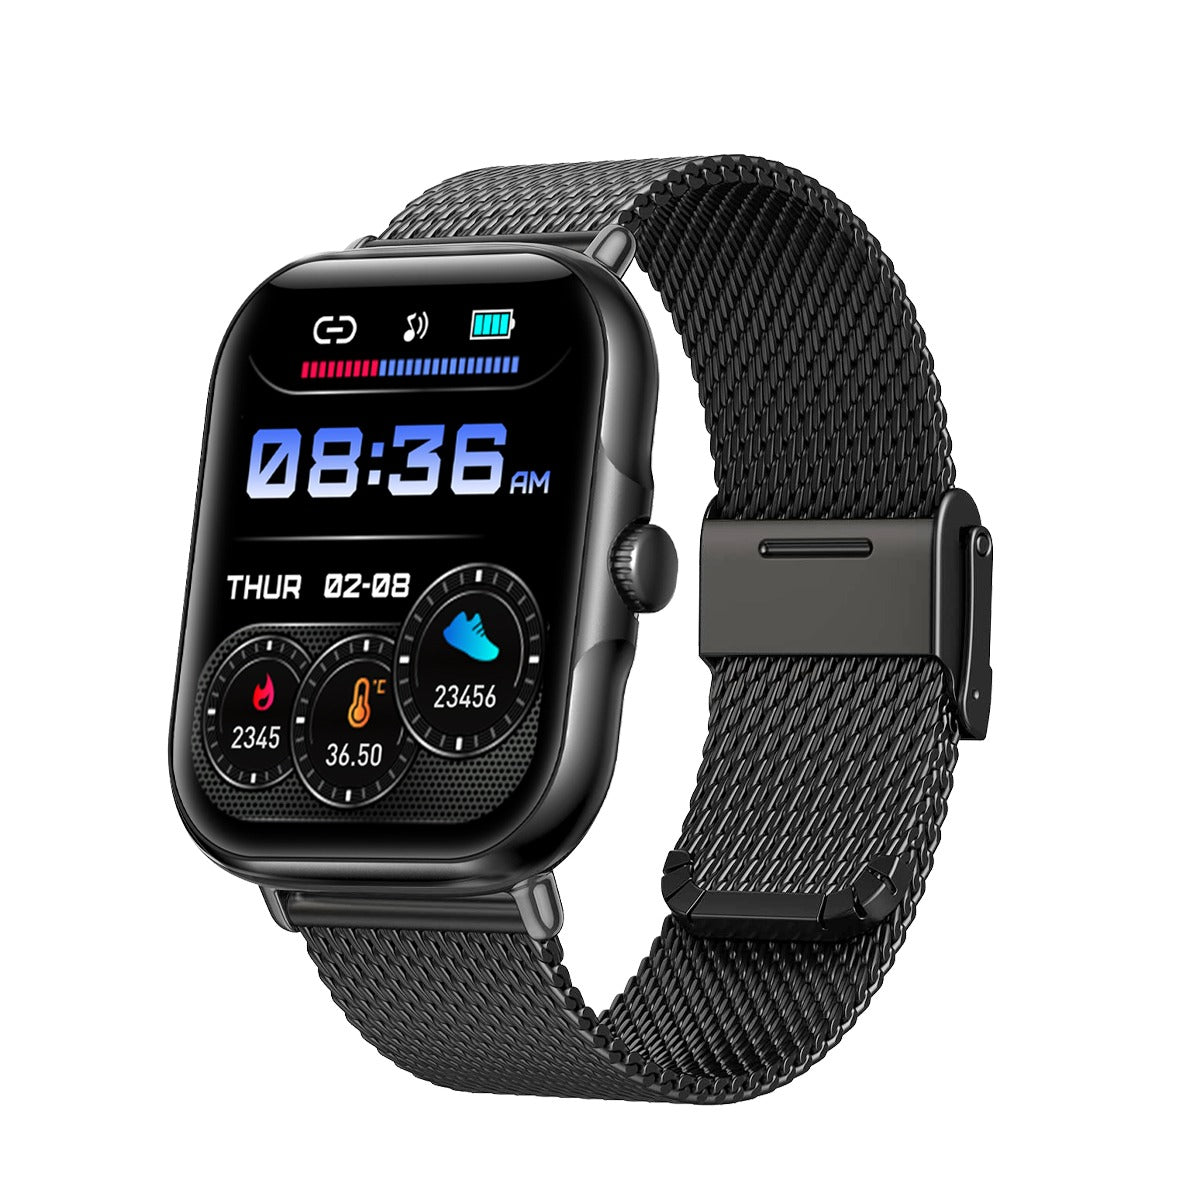 Apple Watch - Price, Full Specifications & Features at Gadgets Now